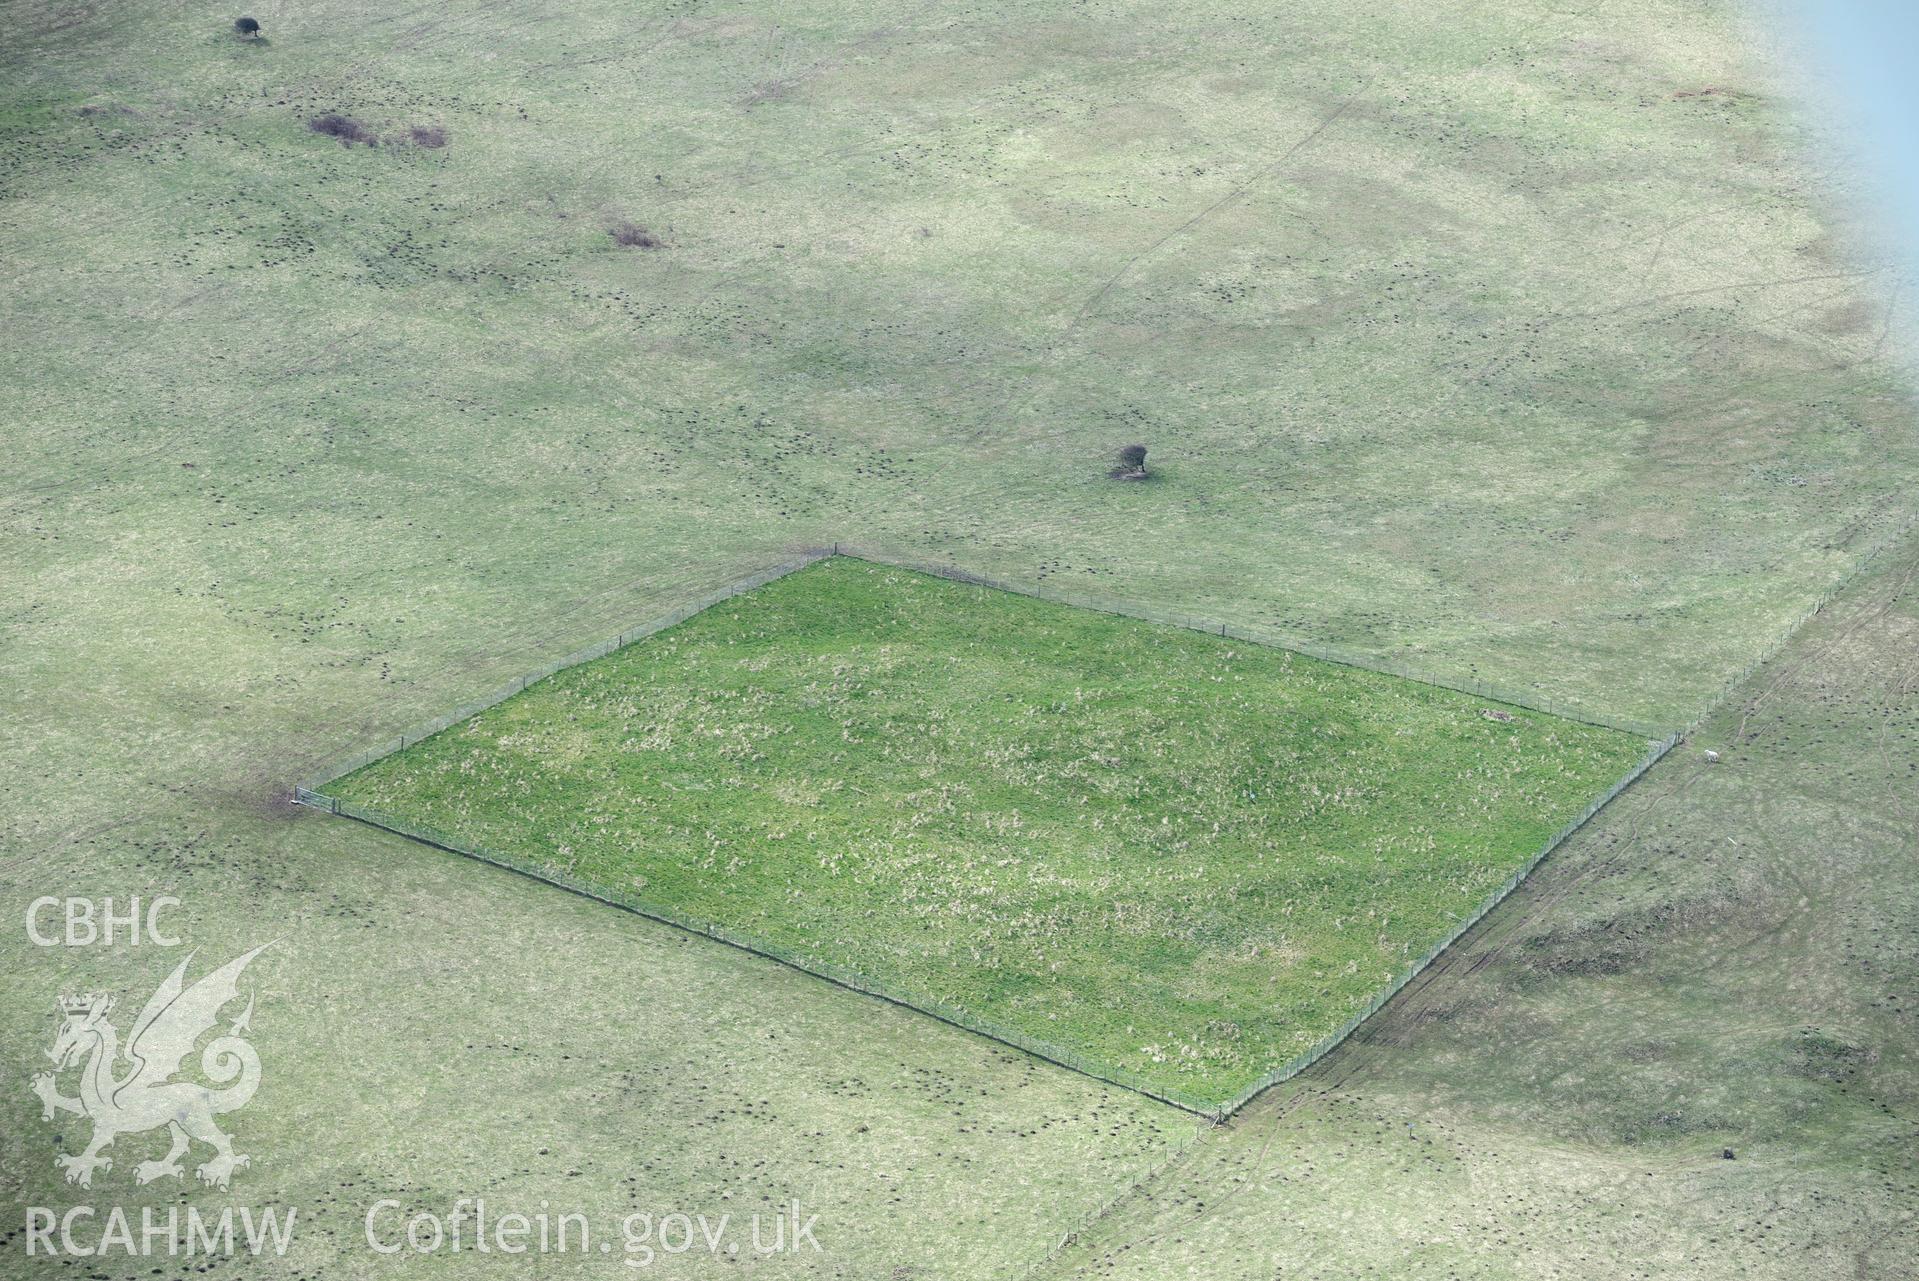 Brownslade Round Barrow. Baseline aerial reconnaissance survey for the CHERISH Project. ? Crown: CHERISH PROJECT 2018. Produced with EU funds through the Ireland Wales Co-operation Programme 2014-2020. All material made freely available through the Open Government Licence.